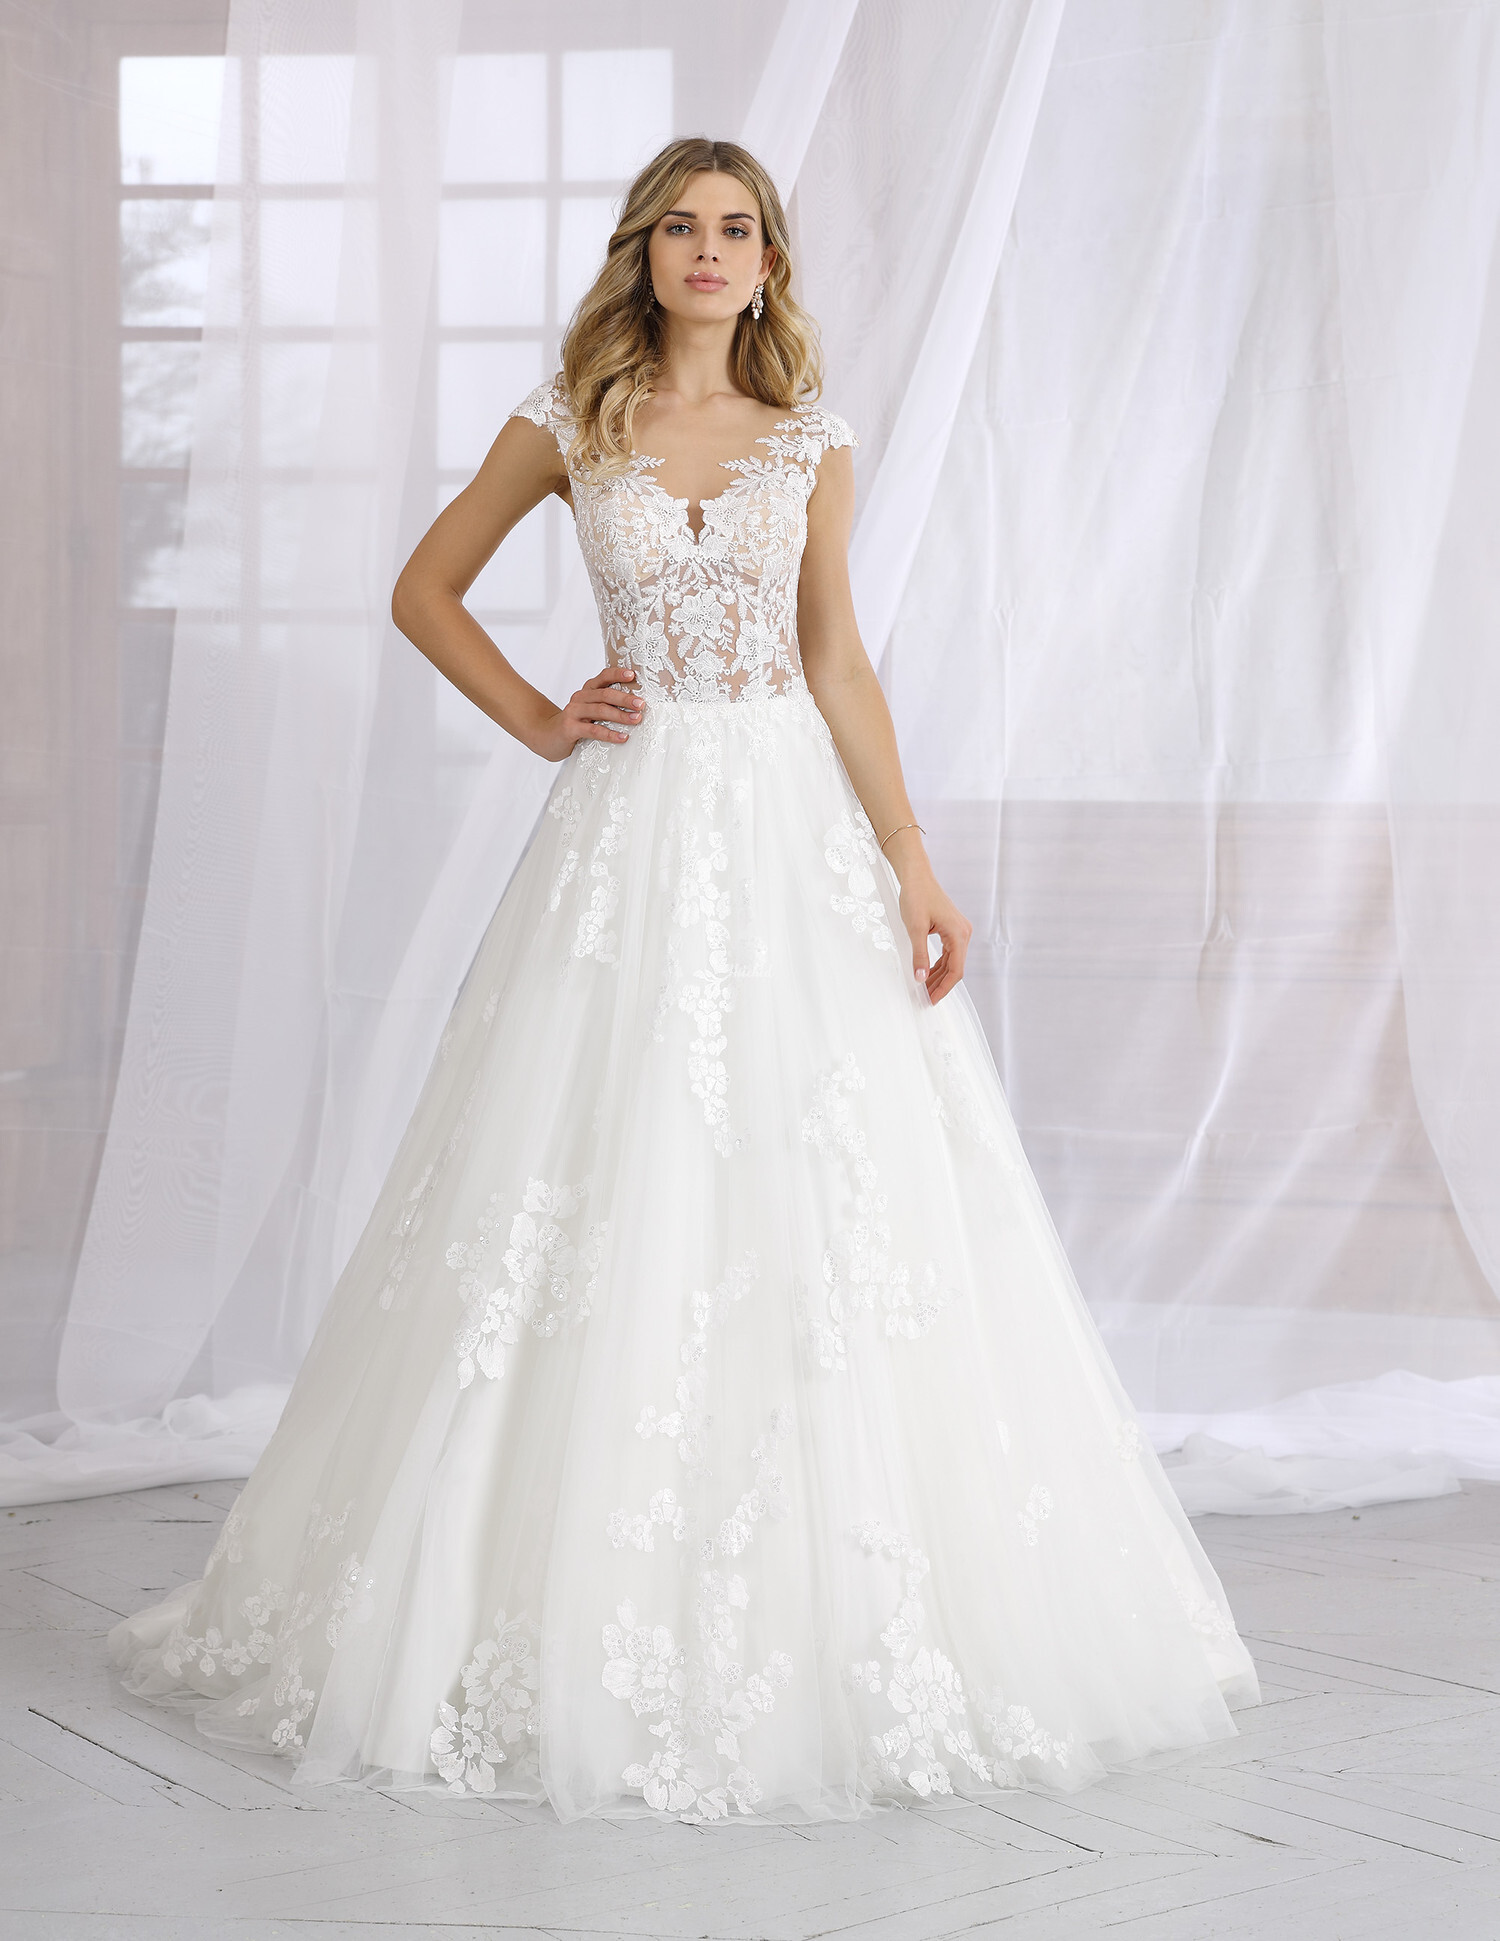 421016 Wedding Dress from Ladybird - hitched.co.uk